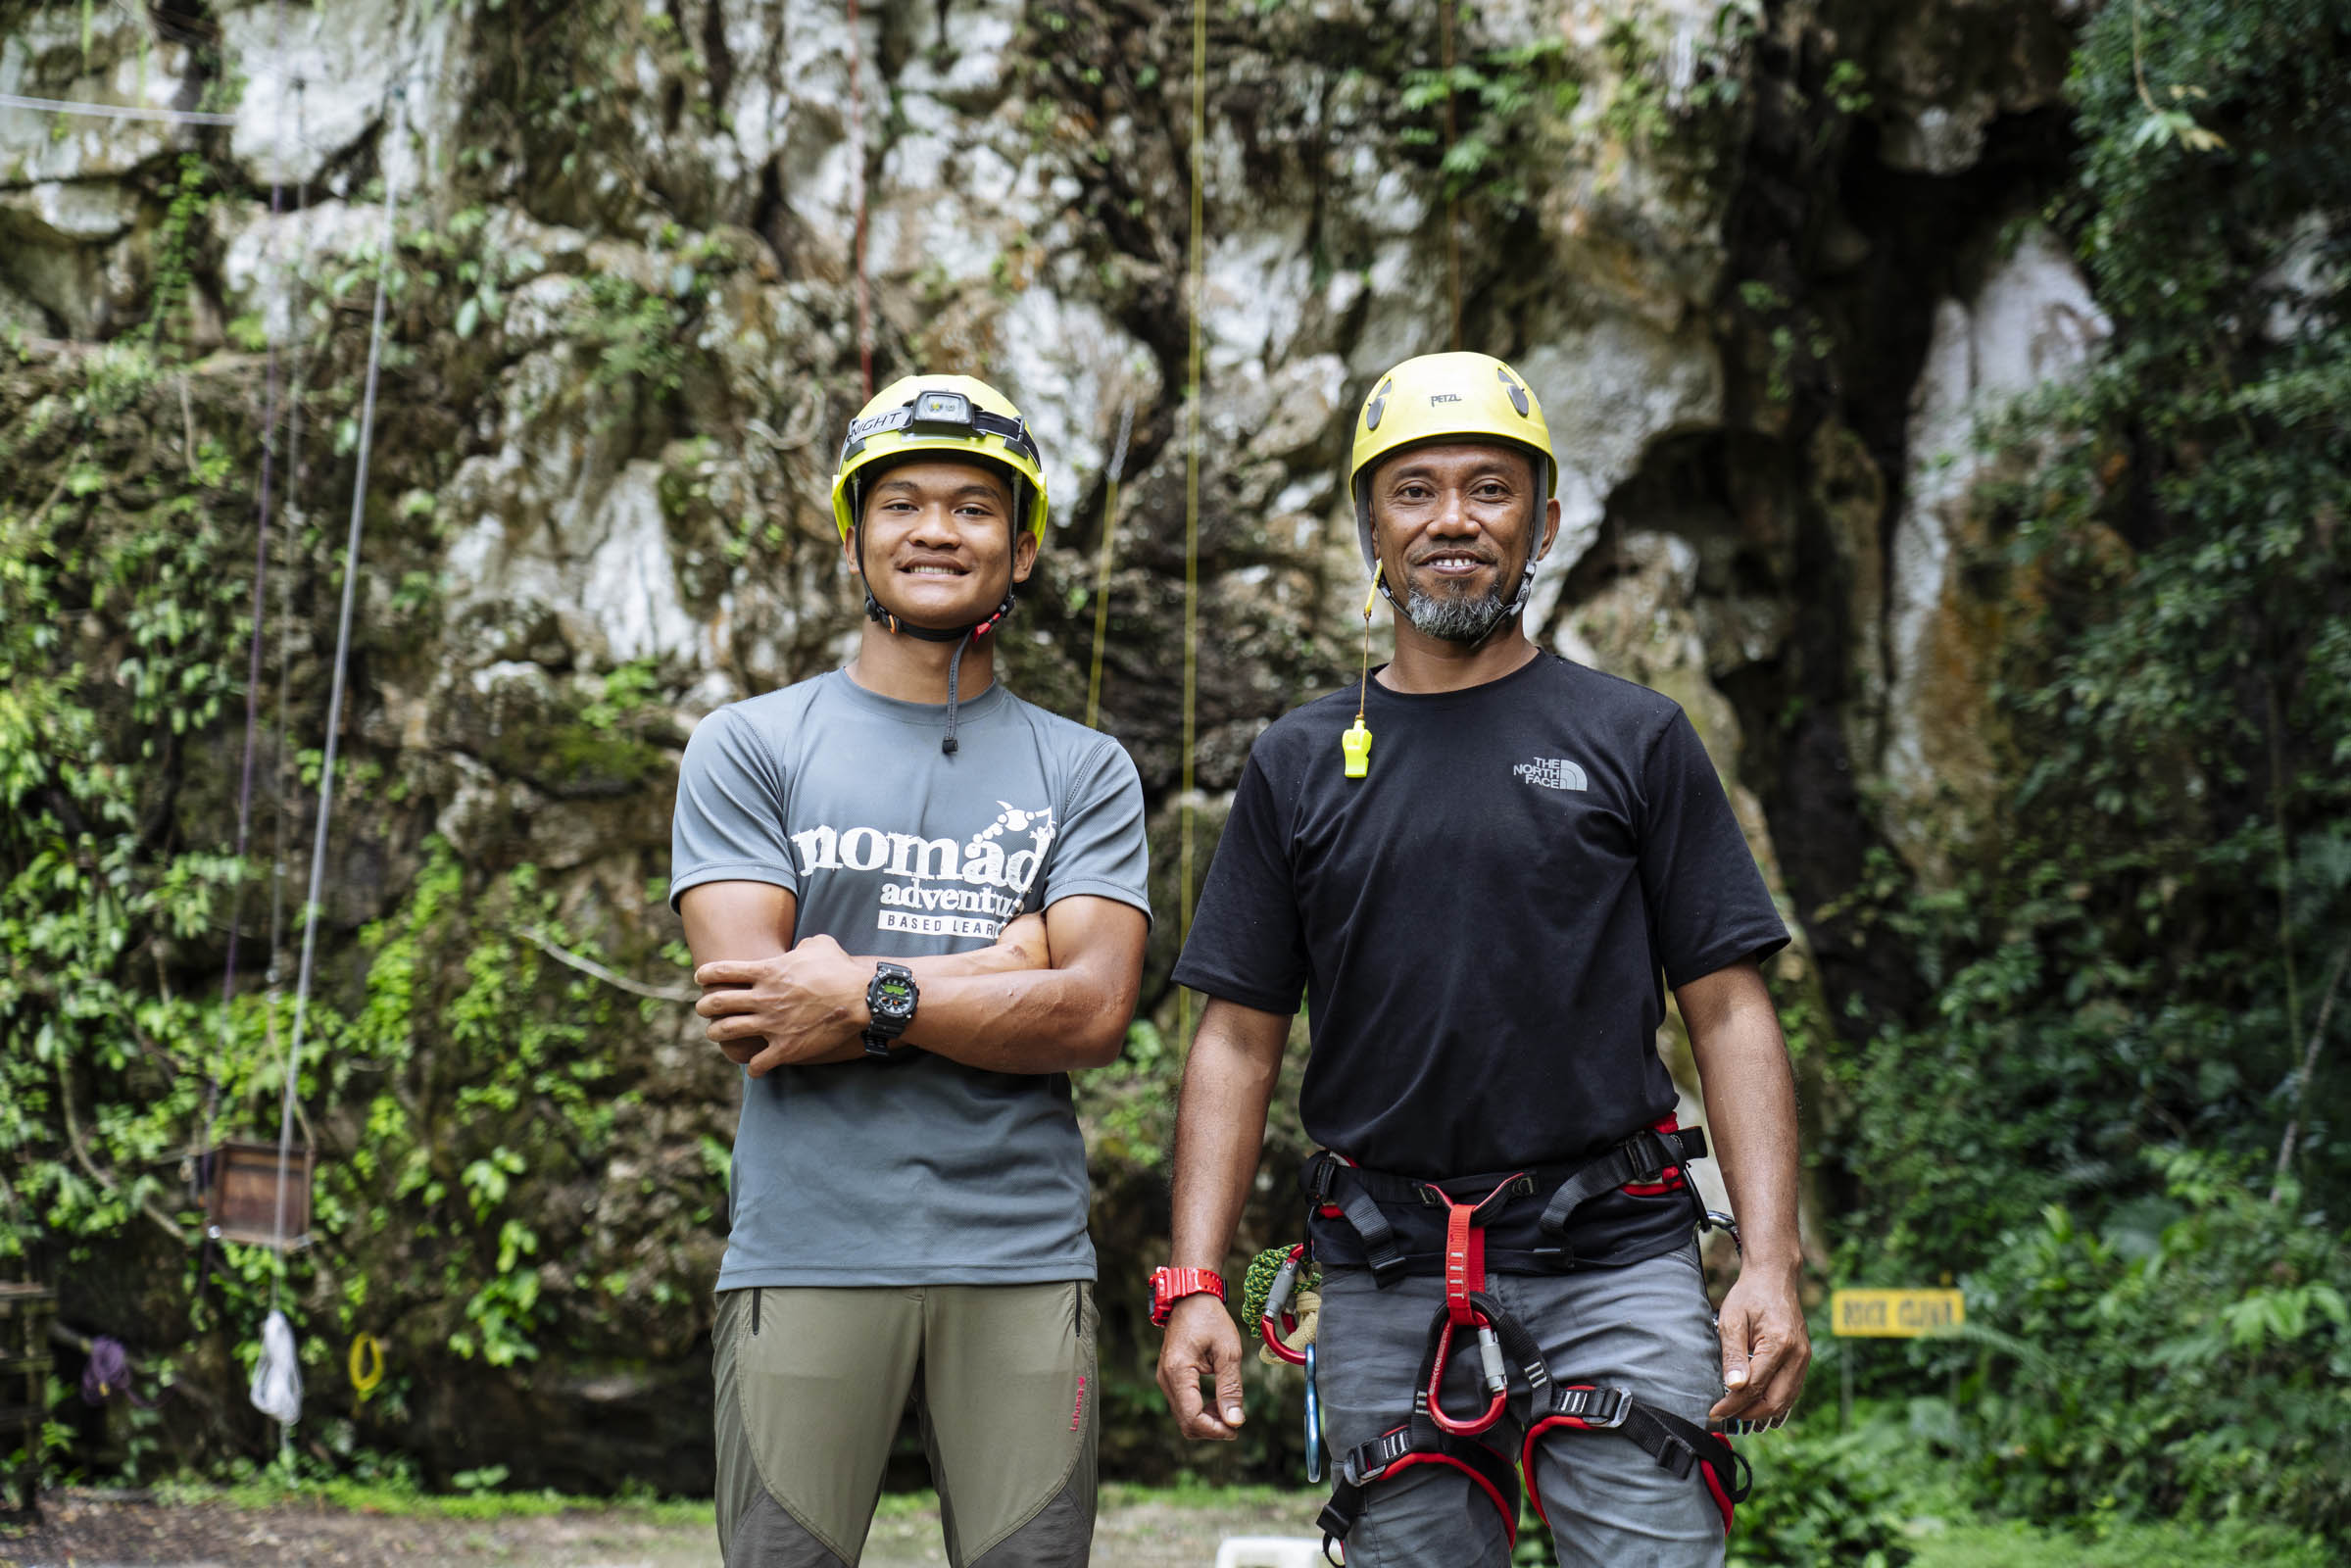 Student Imran (left) and instructor Rafizi (right) at Nomad Adventure. Photo by Teoh Eng Hooi.